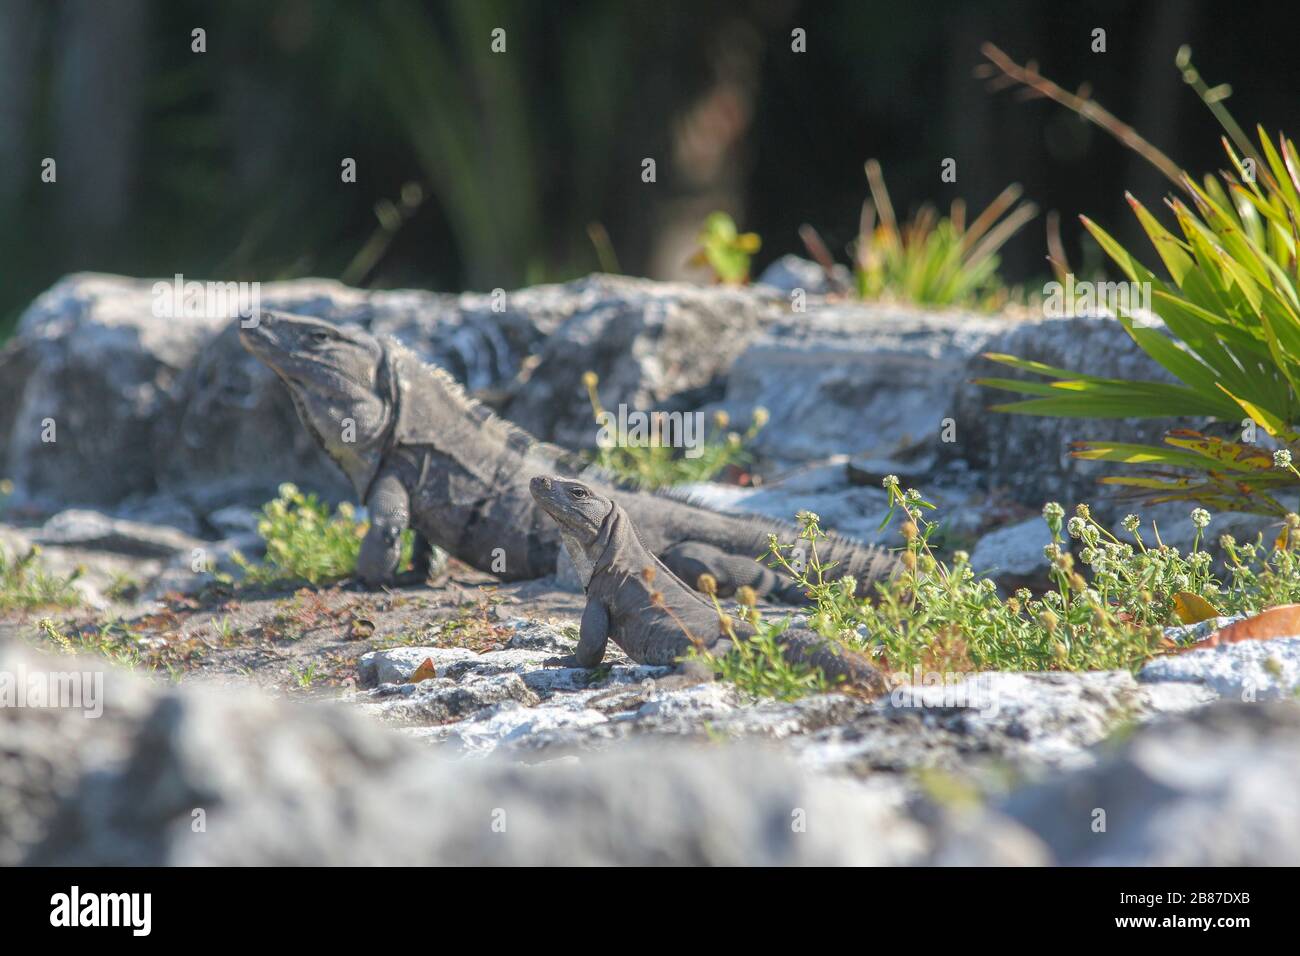 A smaller iguana in focus, larger iguana in the background, El Rey Mayan Archaeological Site, Hotel Zone, Cancun, Quintana Roo, Yucatan Peninsula, Mex Stock Photo